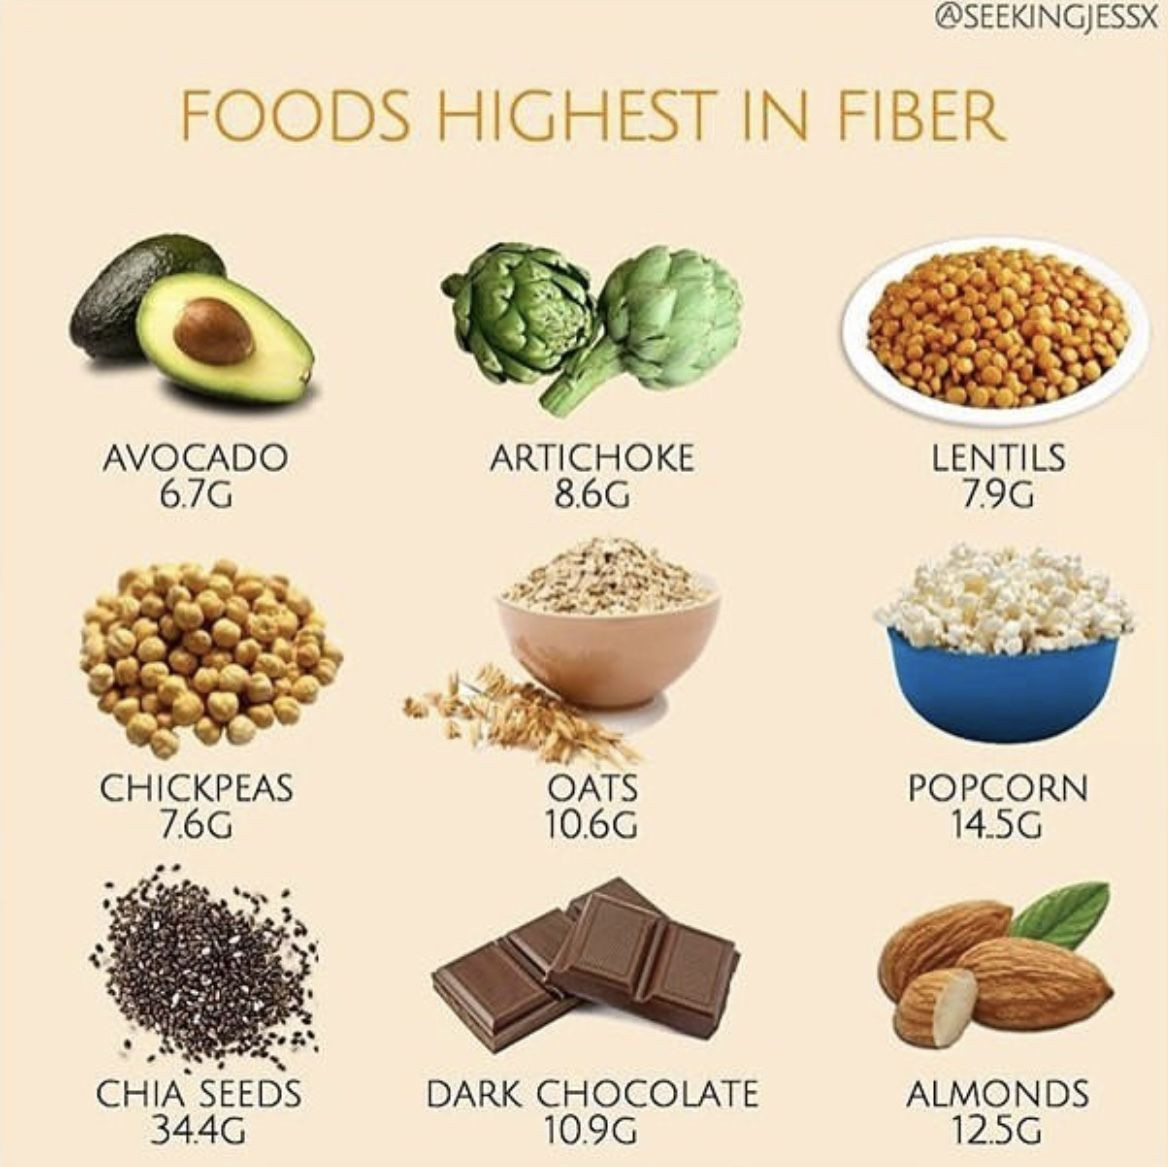 High Fiber Dog Food Recipes
 NATURES CANDY LIBRARY image by BEE VALENTINE